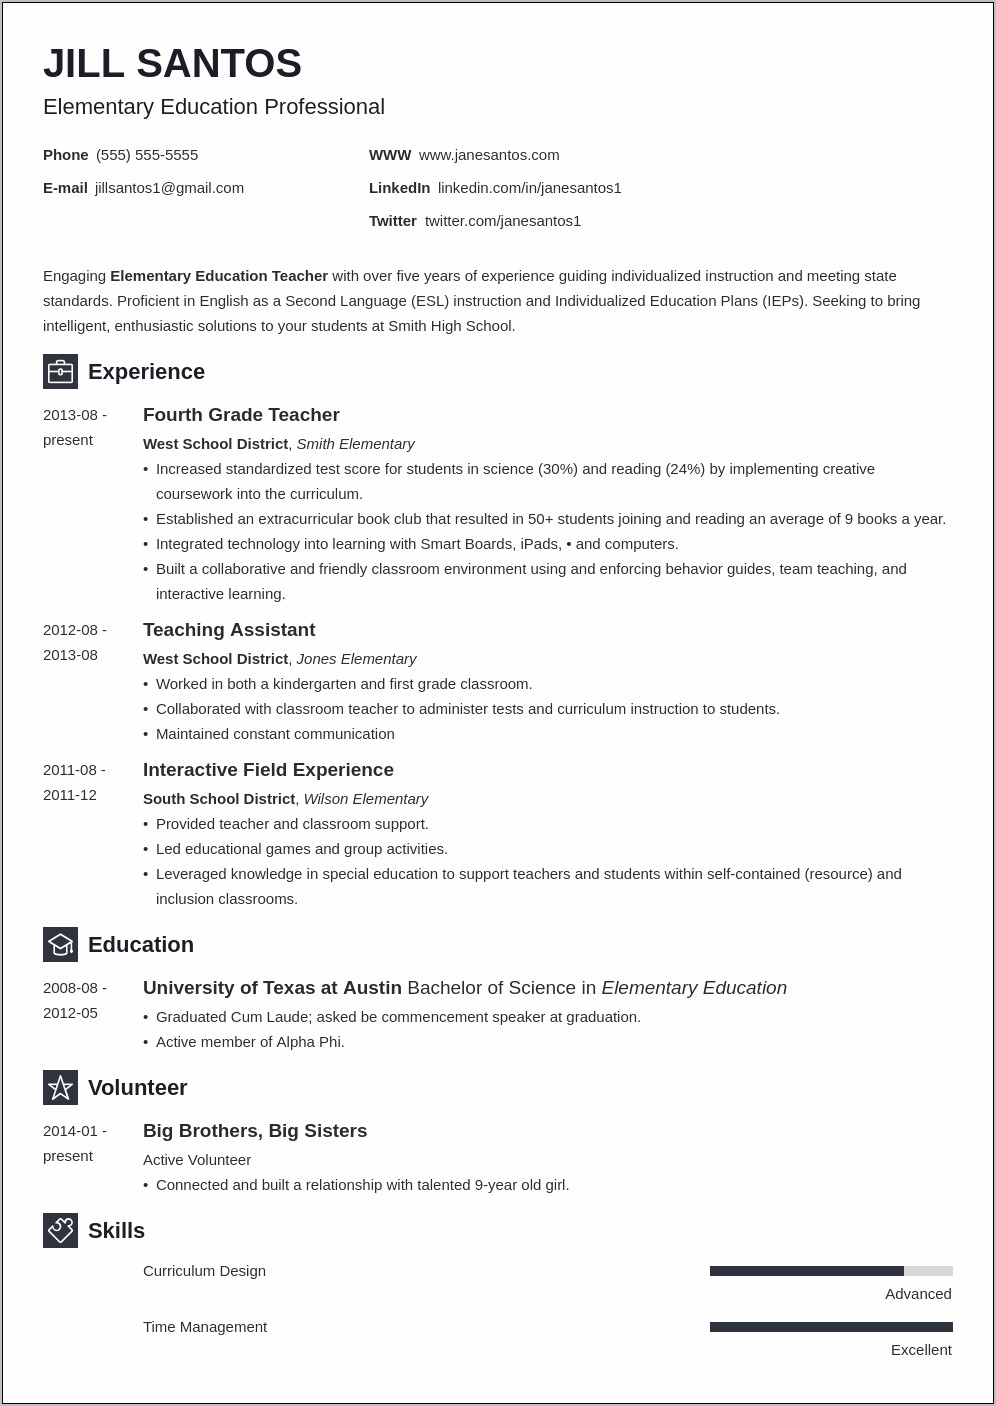 Resume Career Objective Examples For Education